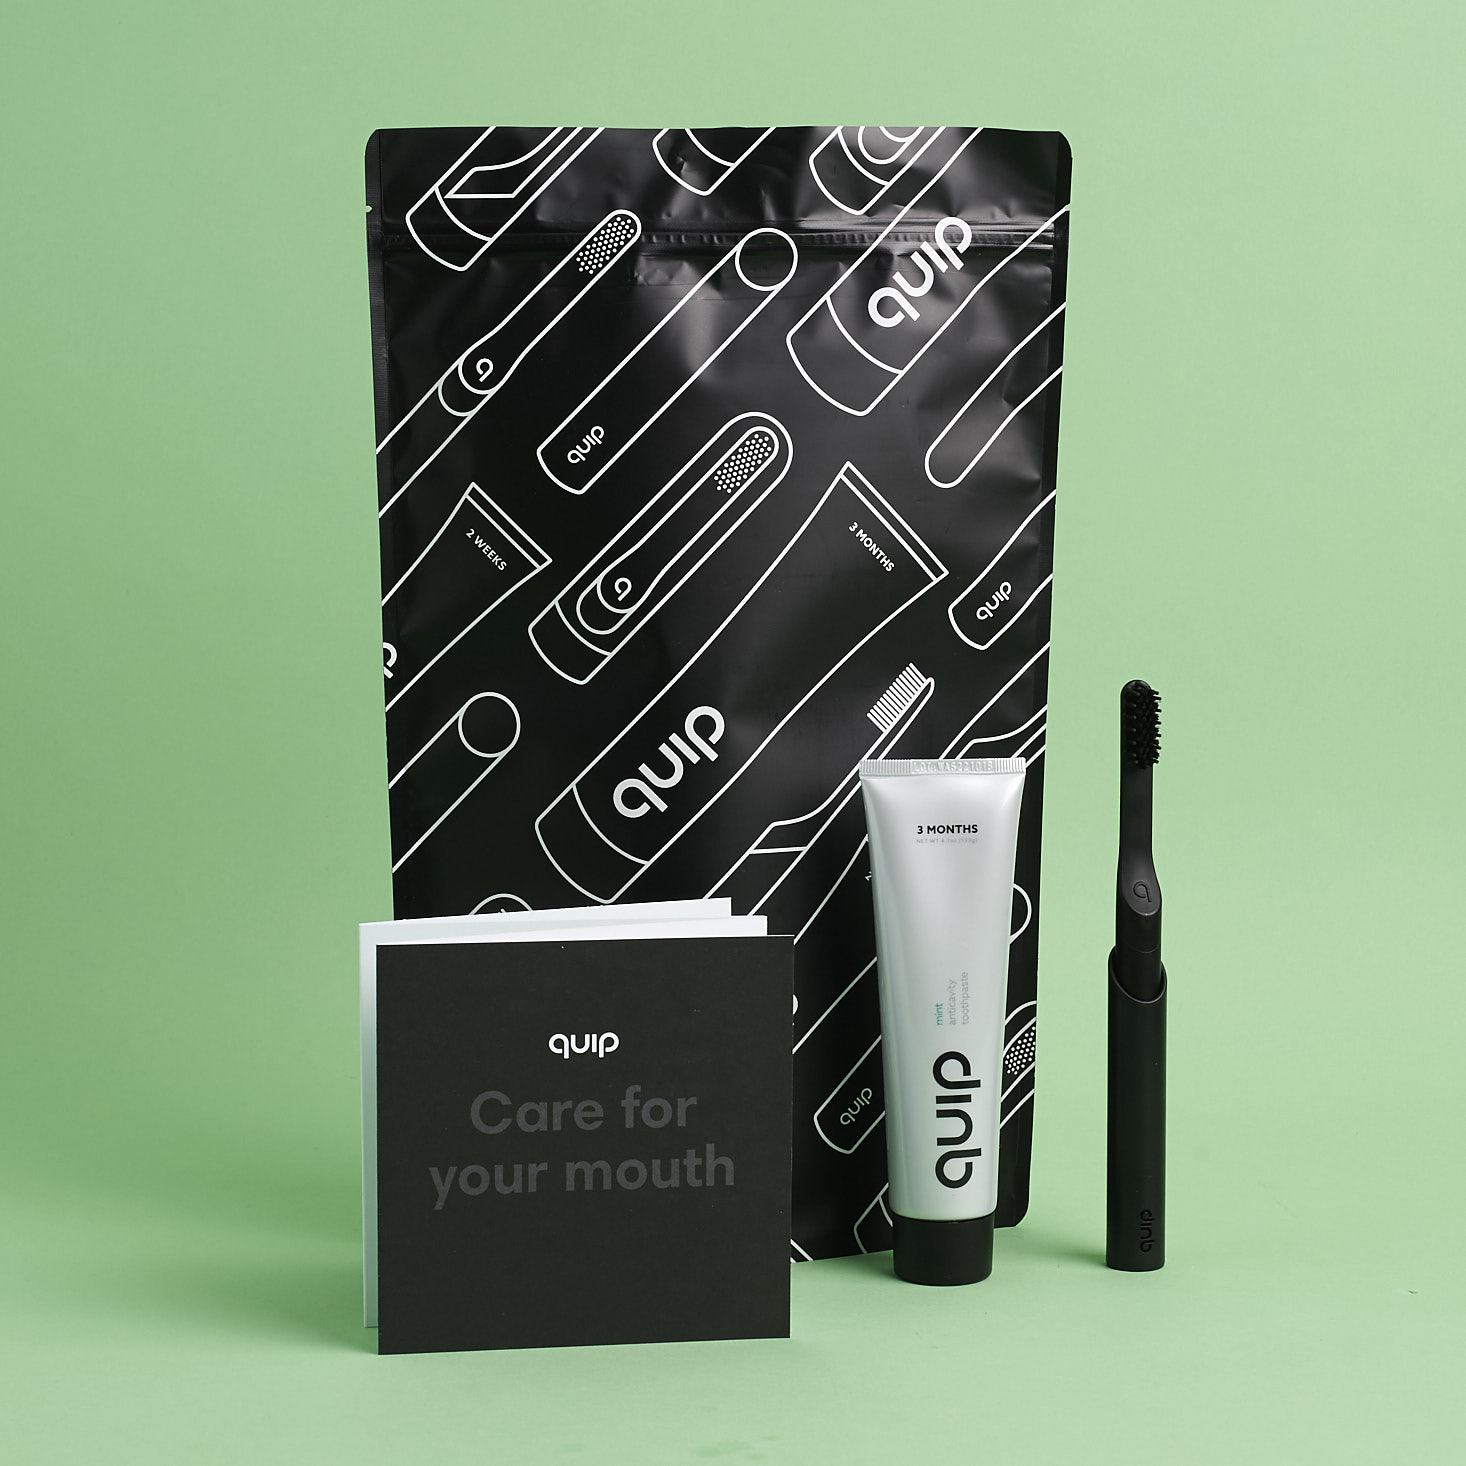 Quip Special Edition ADA Foundation All Black Metal Toothbrush Starter Set Review 2018